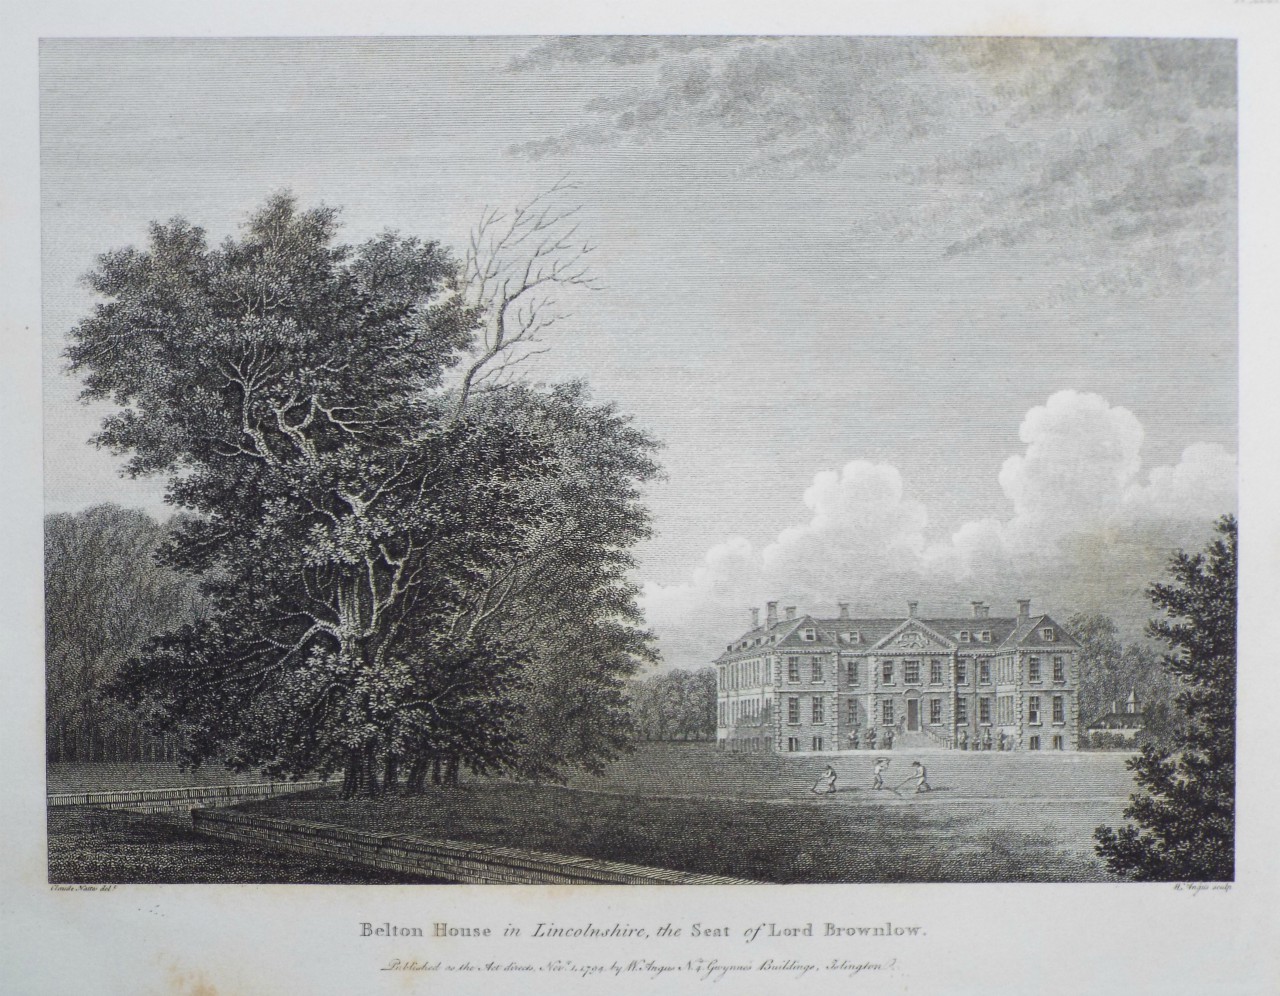 Print - Belton House in Lincolnshire, the Seat of Lord Brownlow. - Angus